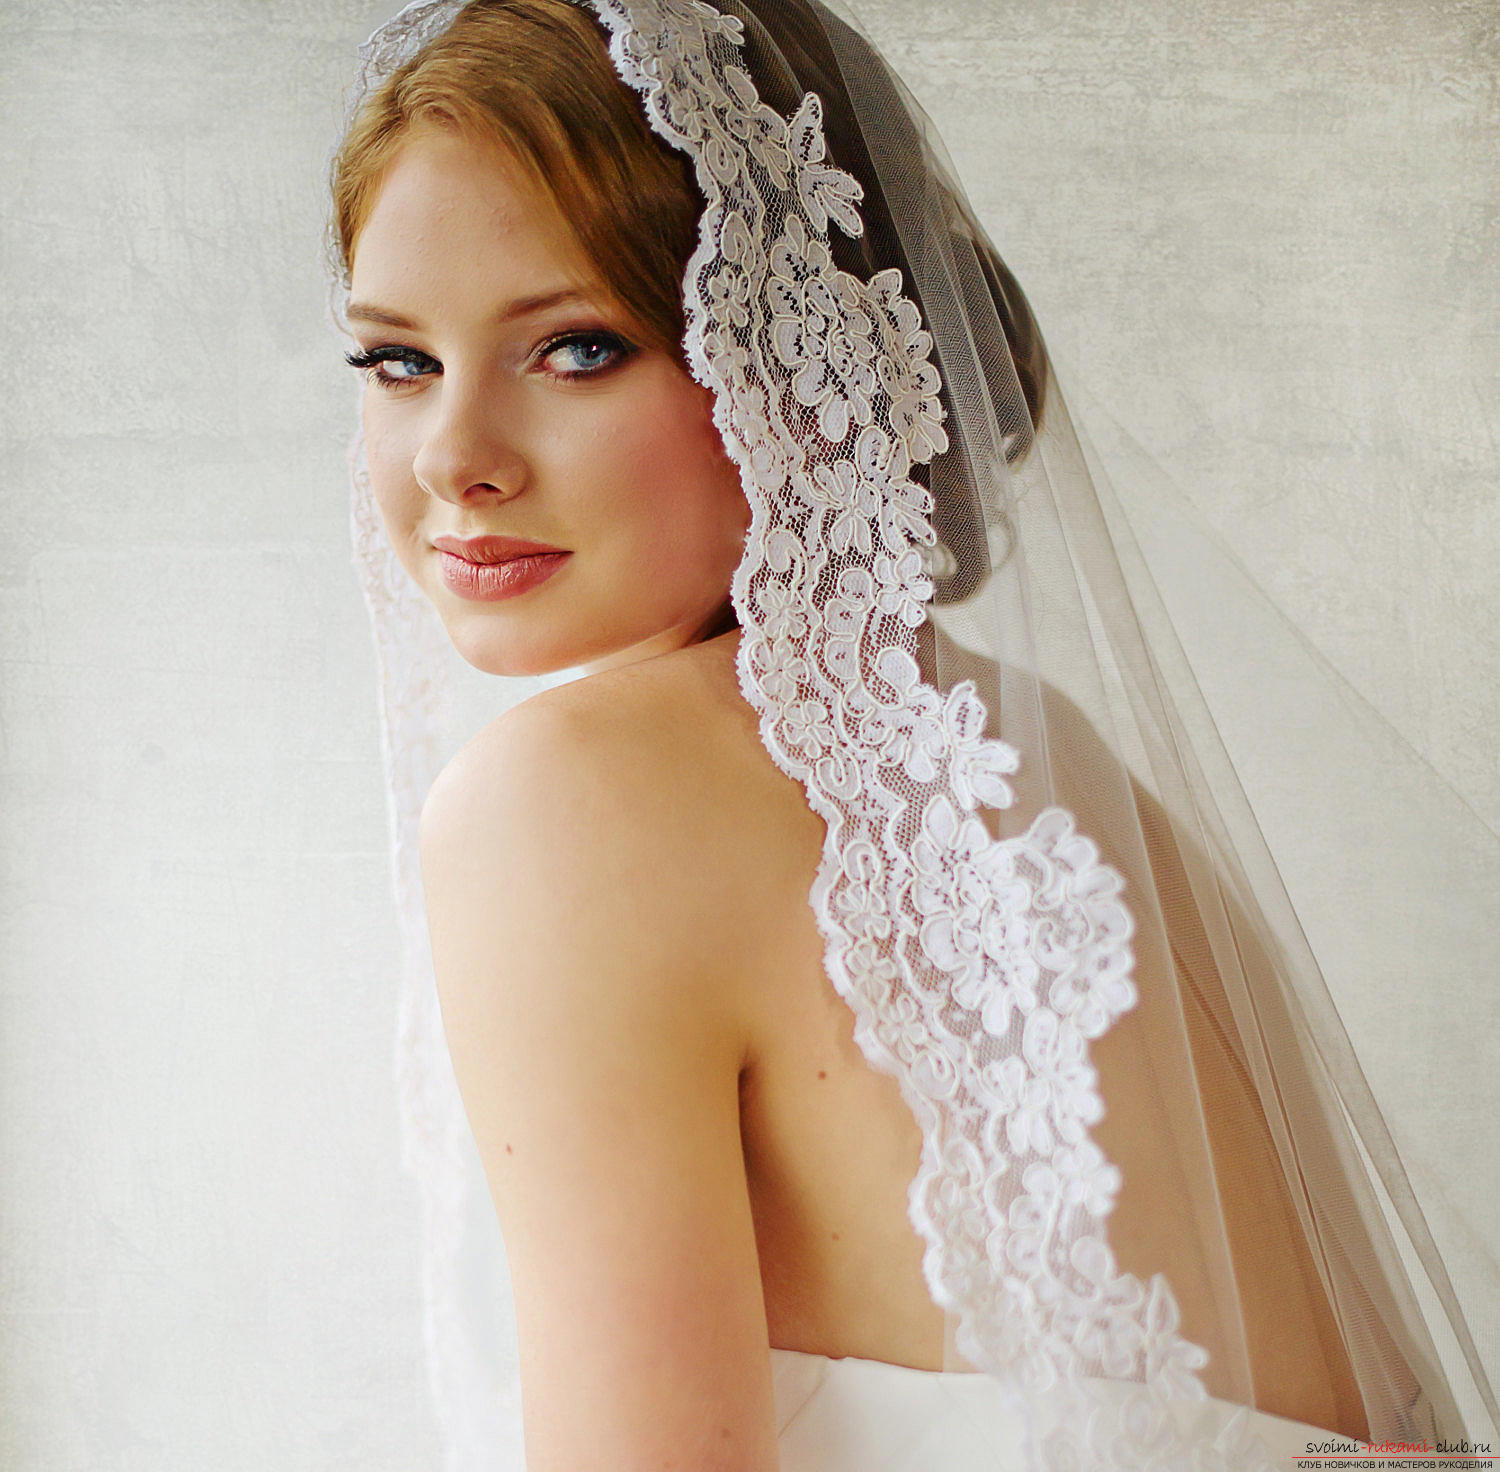 Hairstyles for the bride for the wedding with the veil. Photo №7